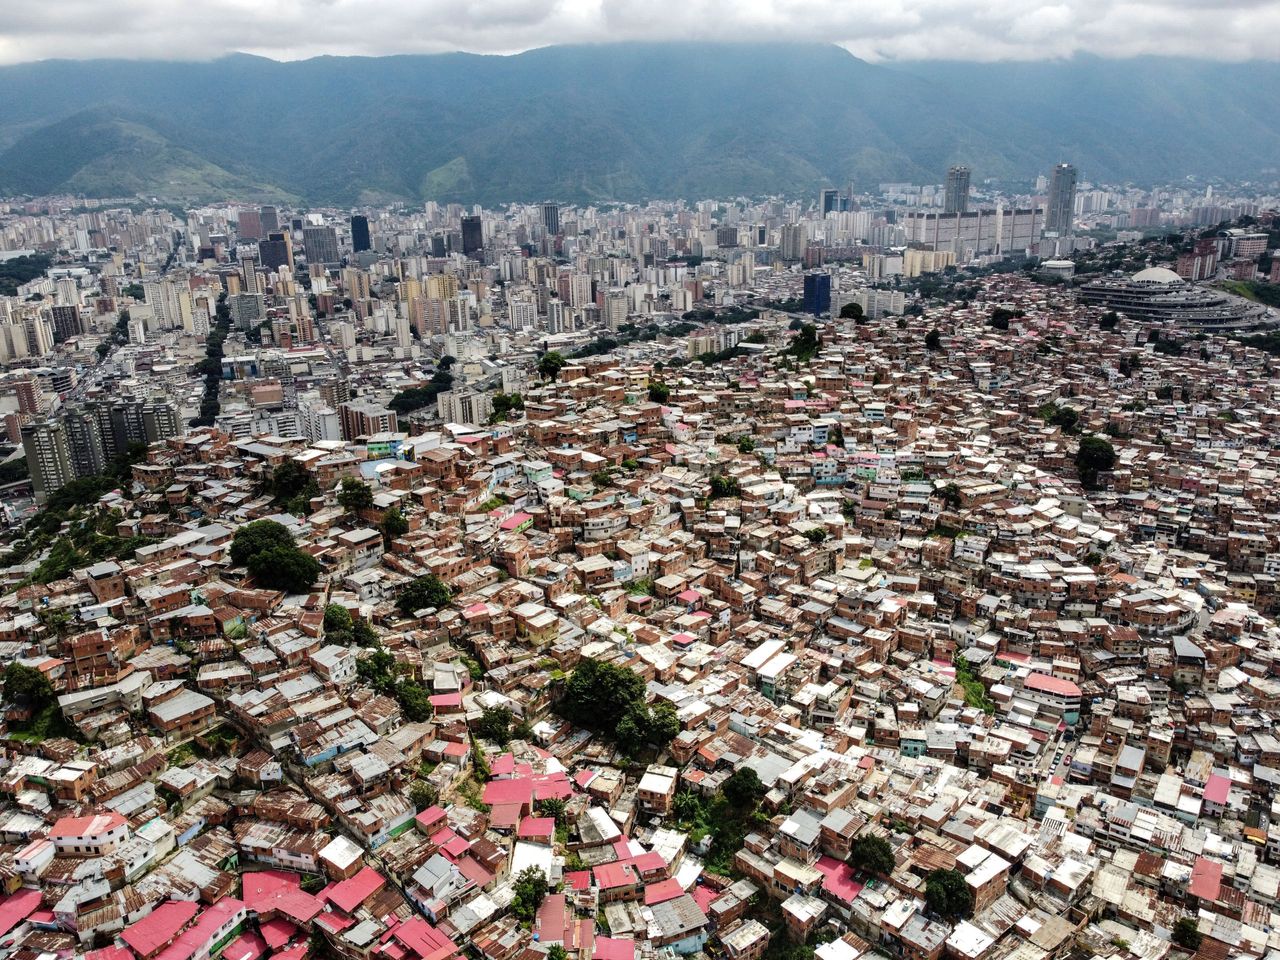 Aerial view showing overpopulated neighborhoods in the southwest of Caracas (right) and residential and commercial buildings in the western part of Venezuela's capital.